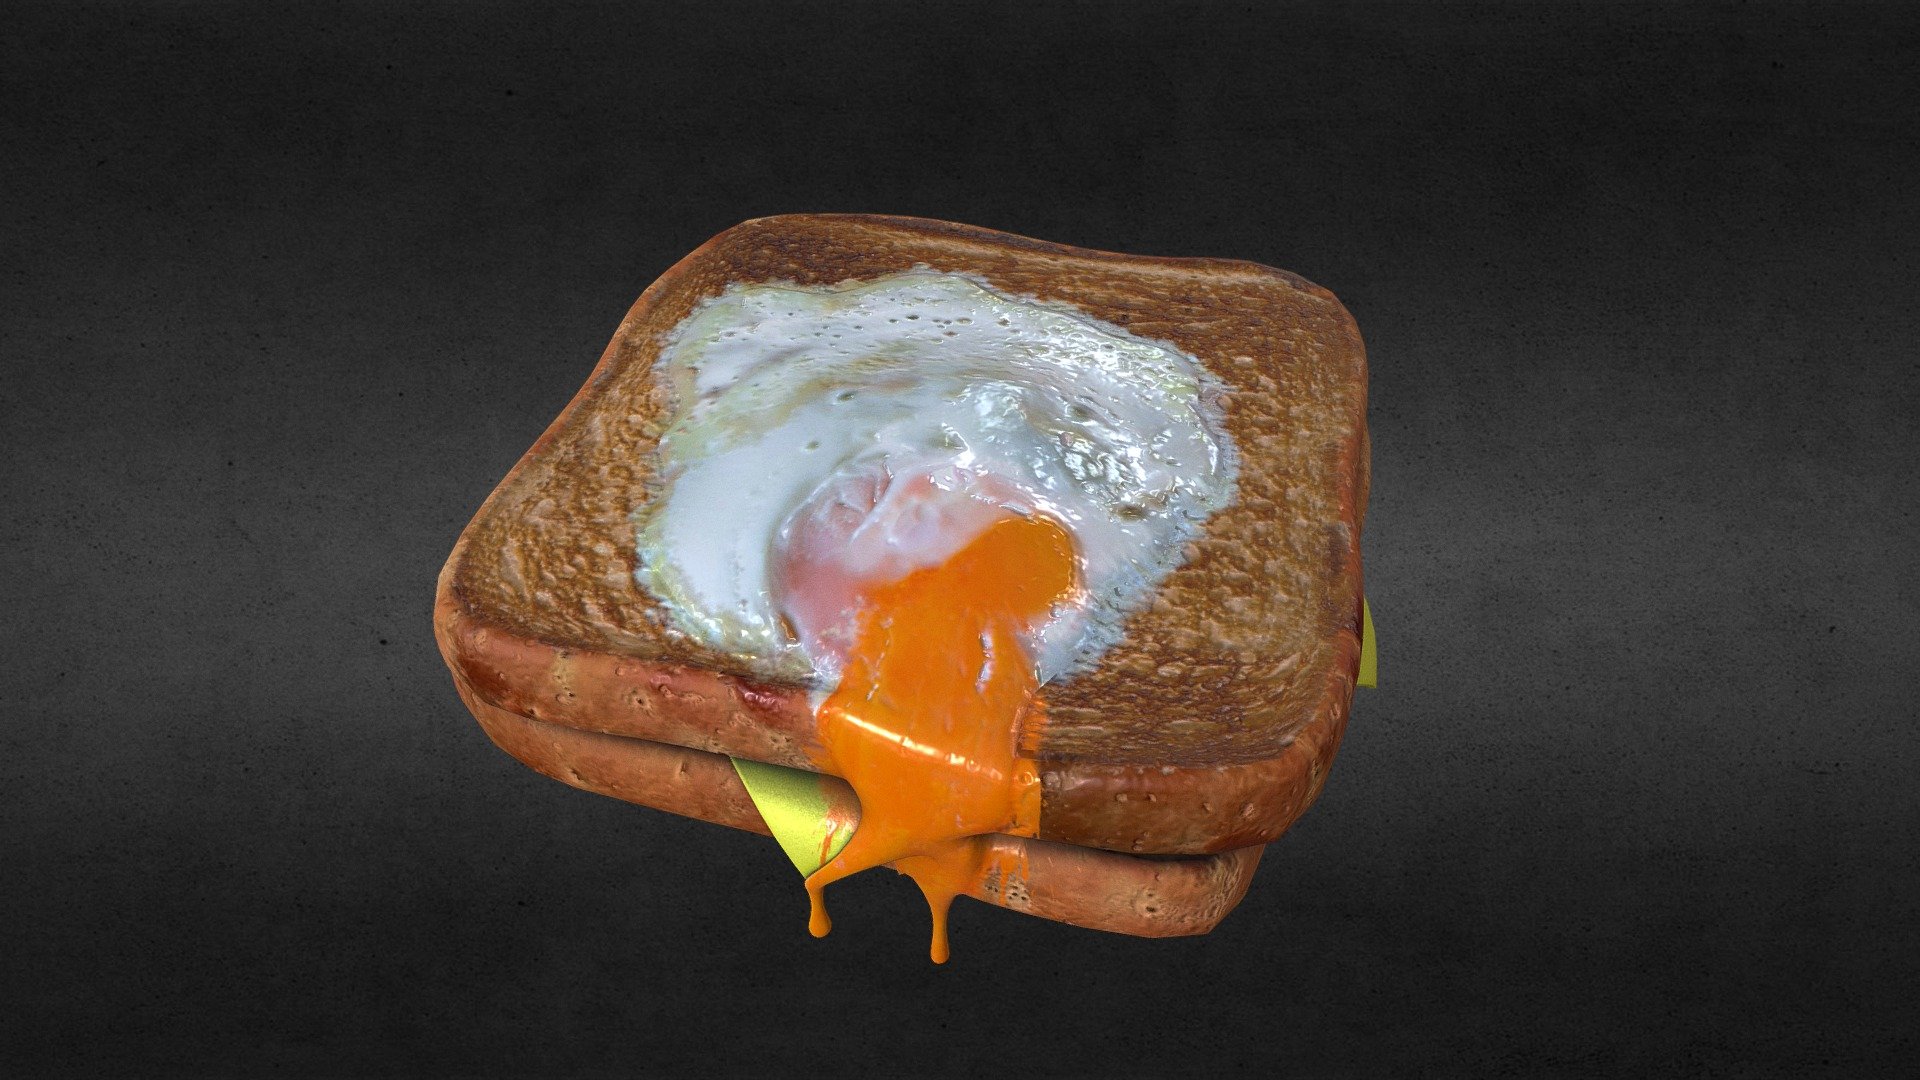 Speed challenge for my self. Did this in two nights.
Egg Toast :P

detail view at my artstation :)
https://www.artstation.com/artwork/YaBbnd - Egg Toast - 3D model by asern_afri 3d model